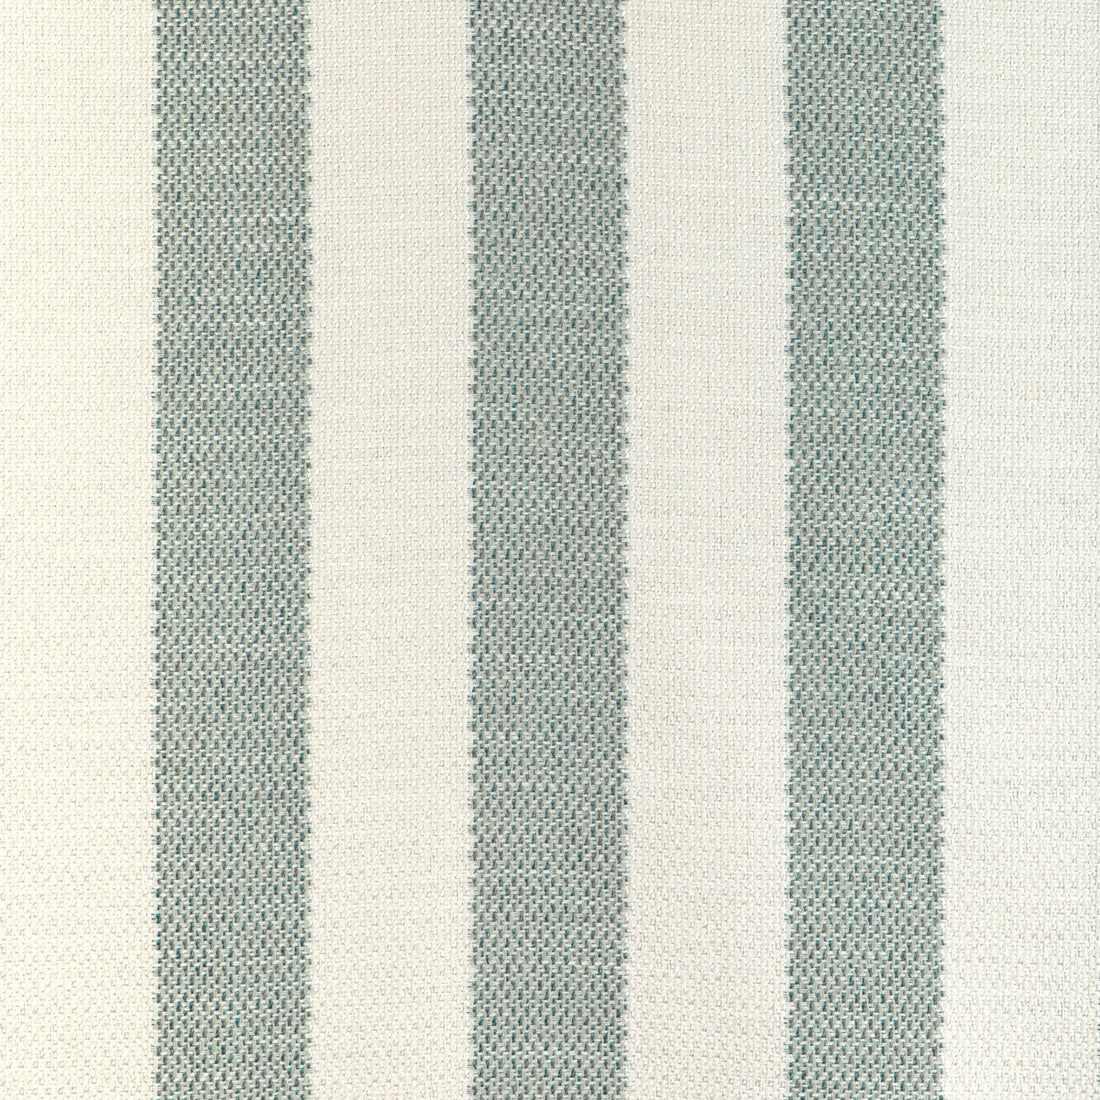 Rocky Top fabric in aqua color - pattern 37054.15.0 - by Kravet Design in the Thom Filicia Latitude collection